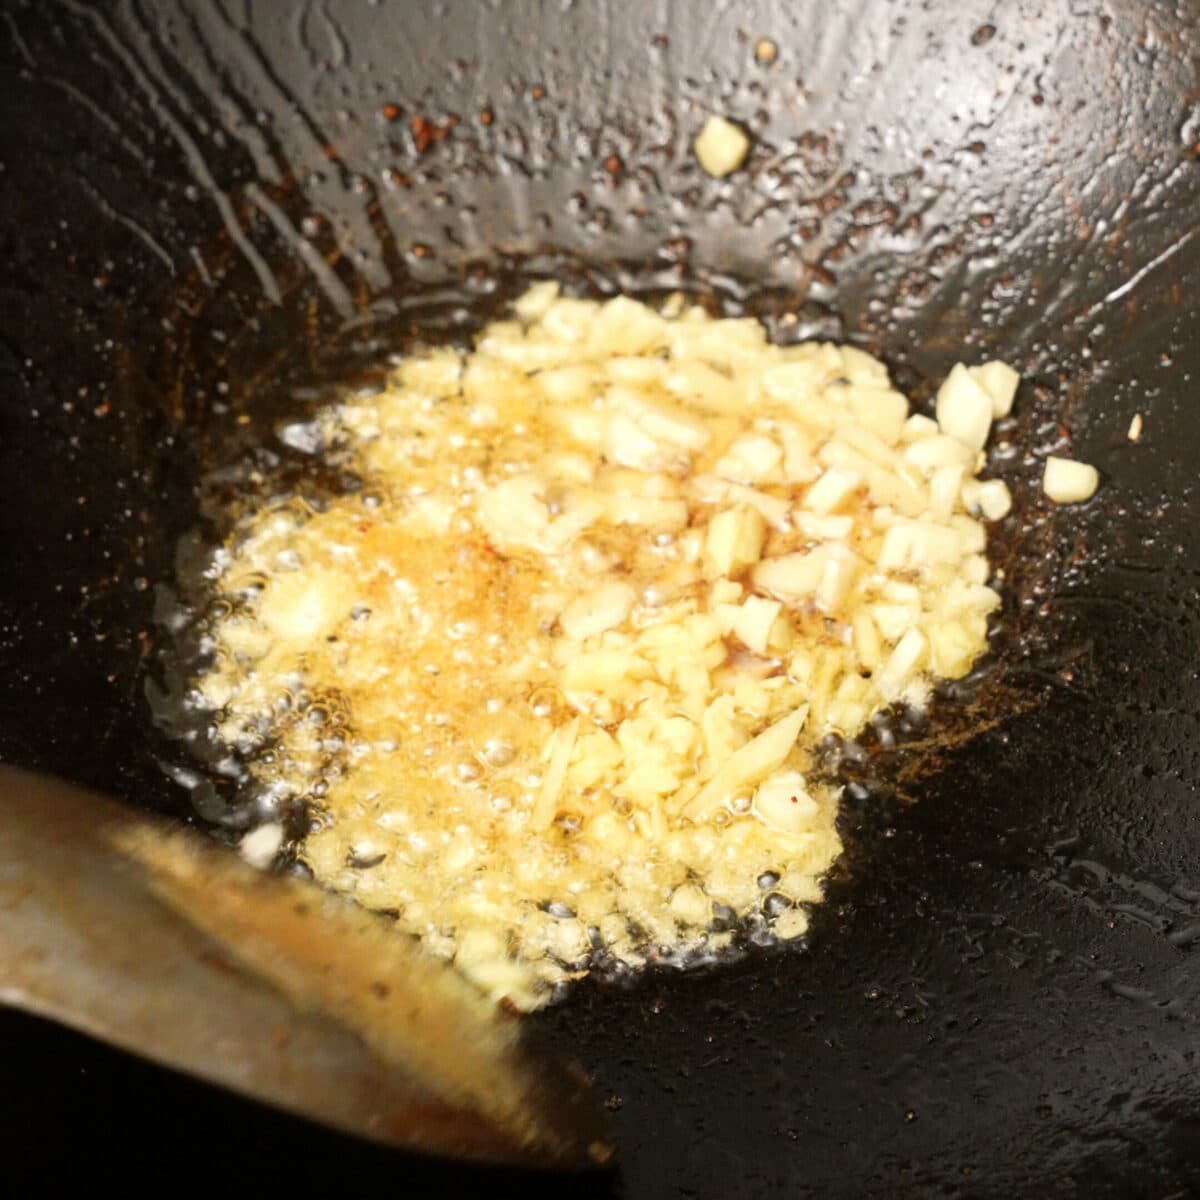 Garlic and ginger sauteing in a wok.